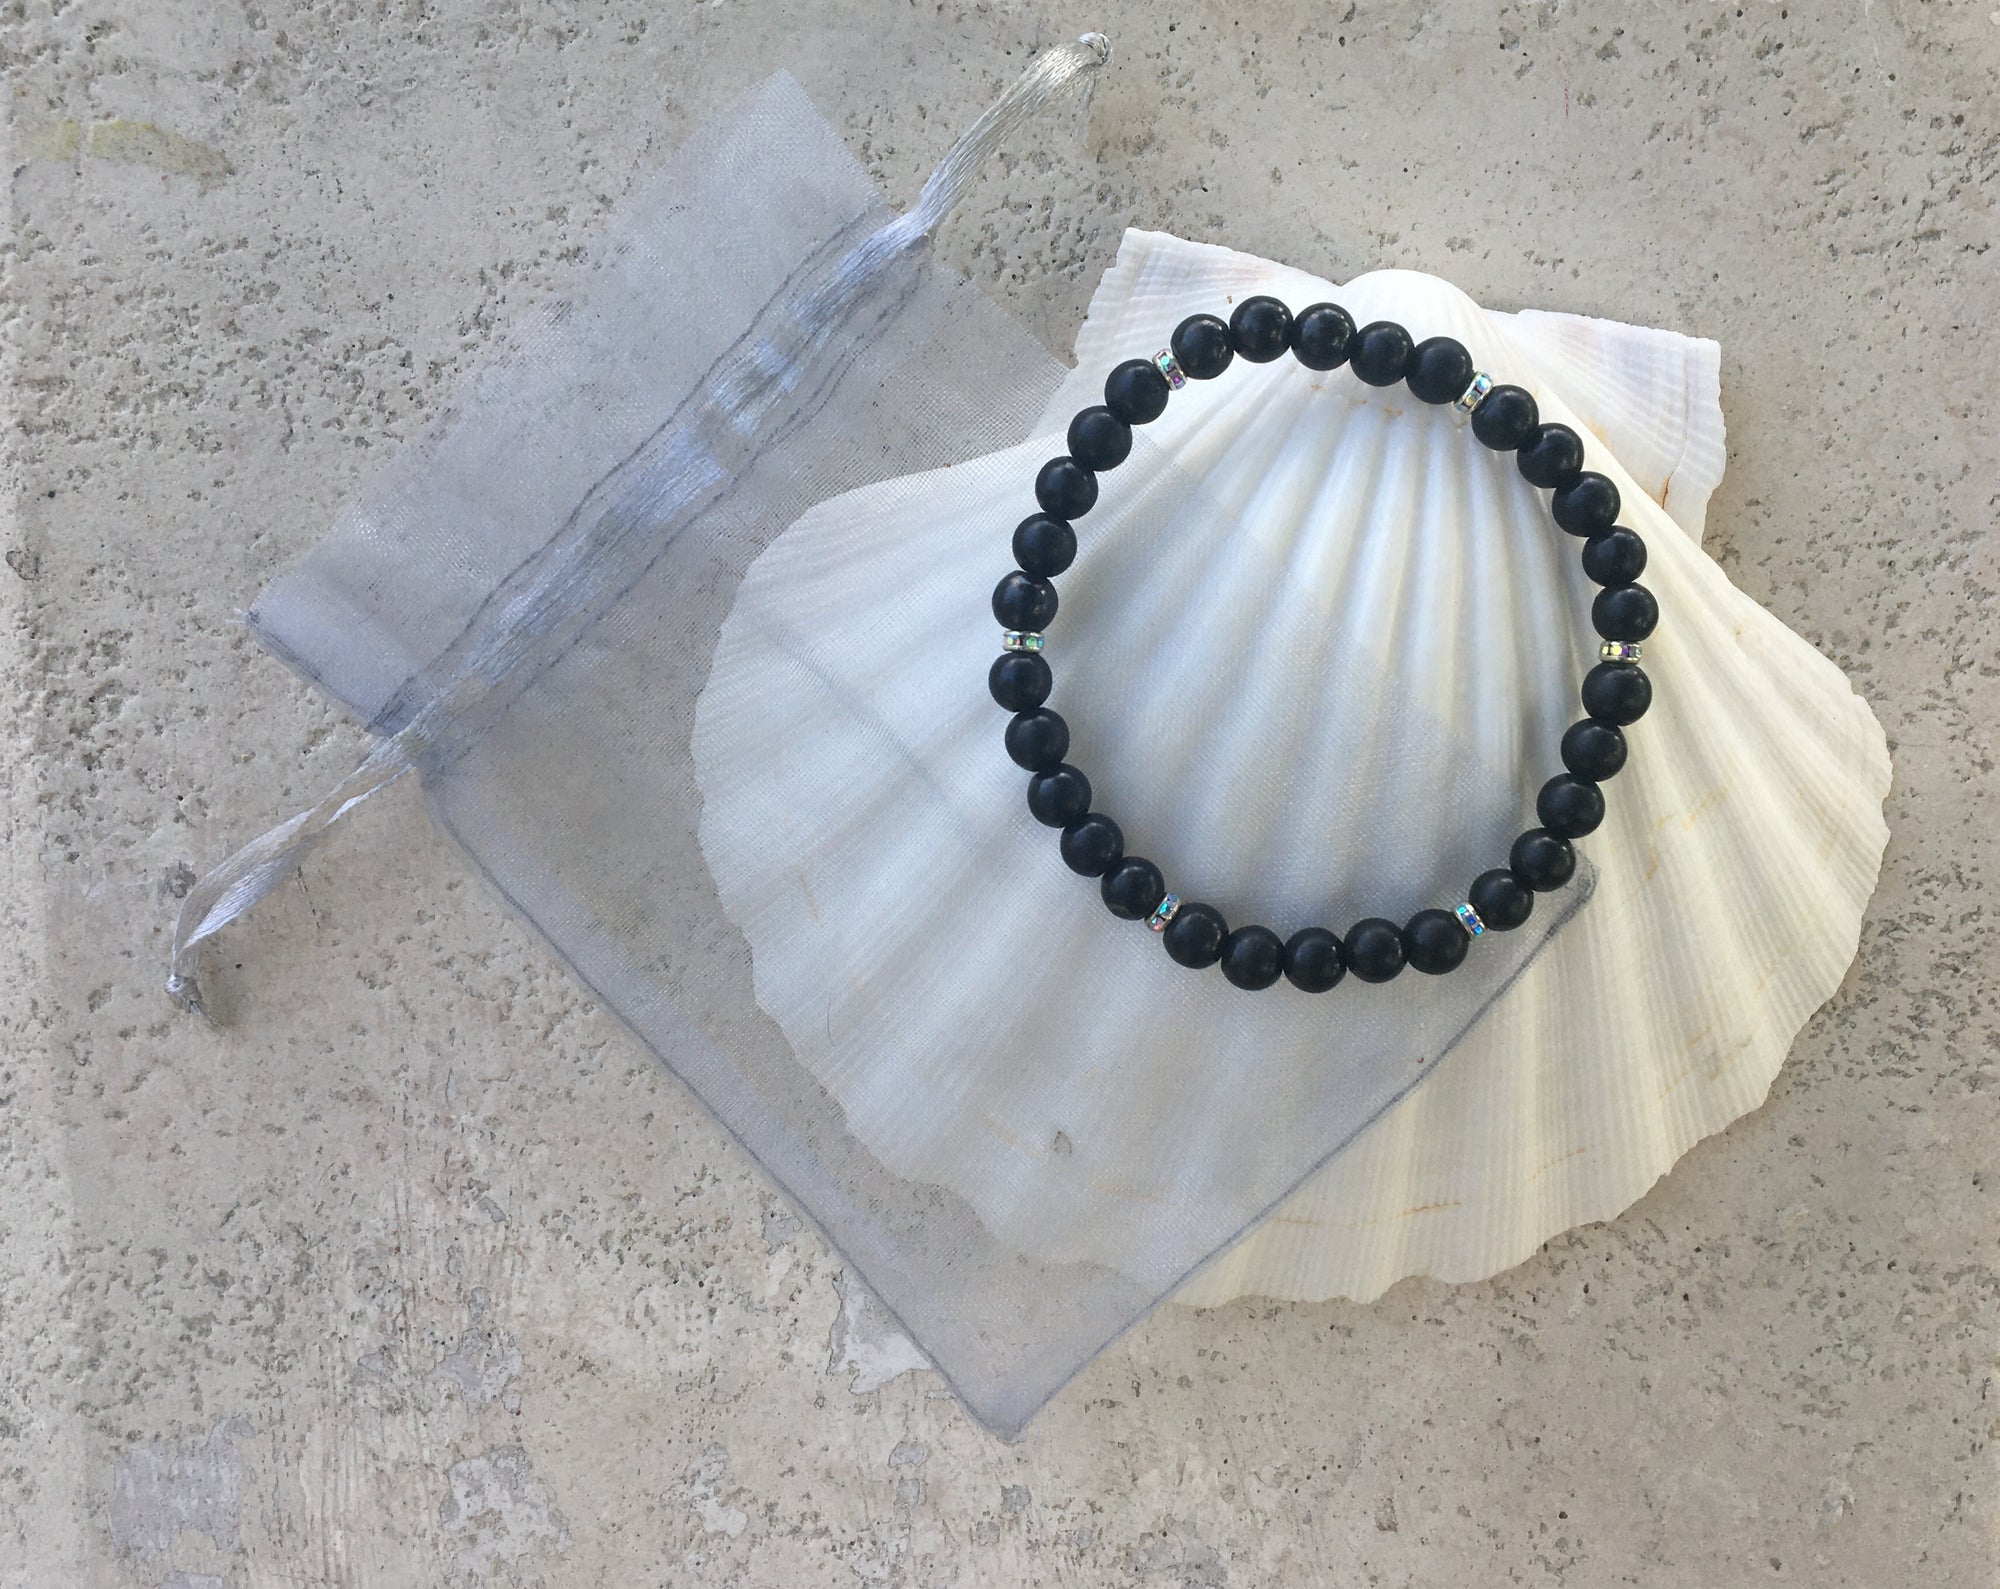 6mm Shungite and Austrian Crystal Protection Bracelet